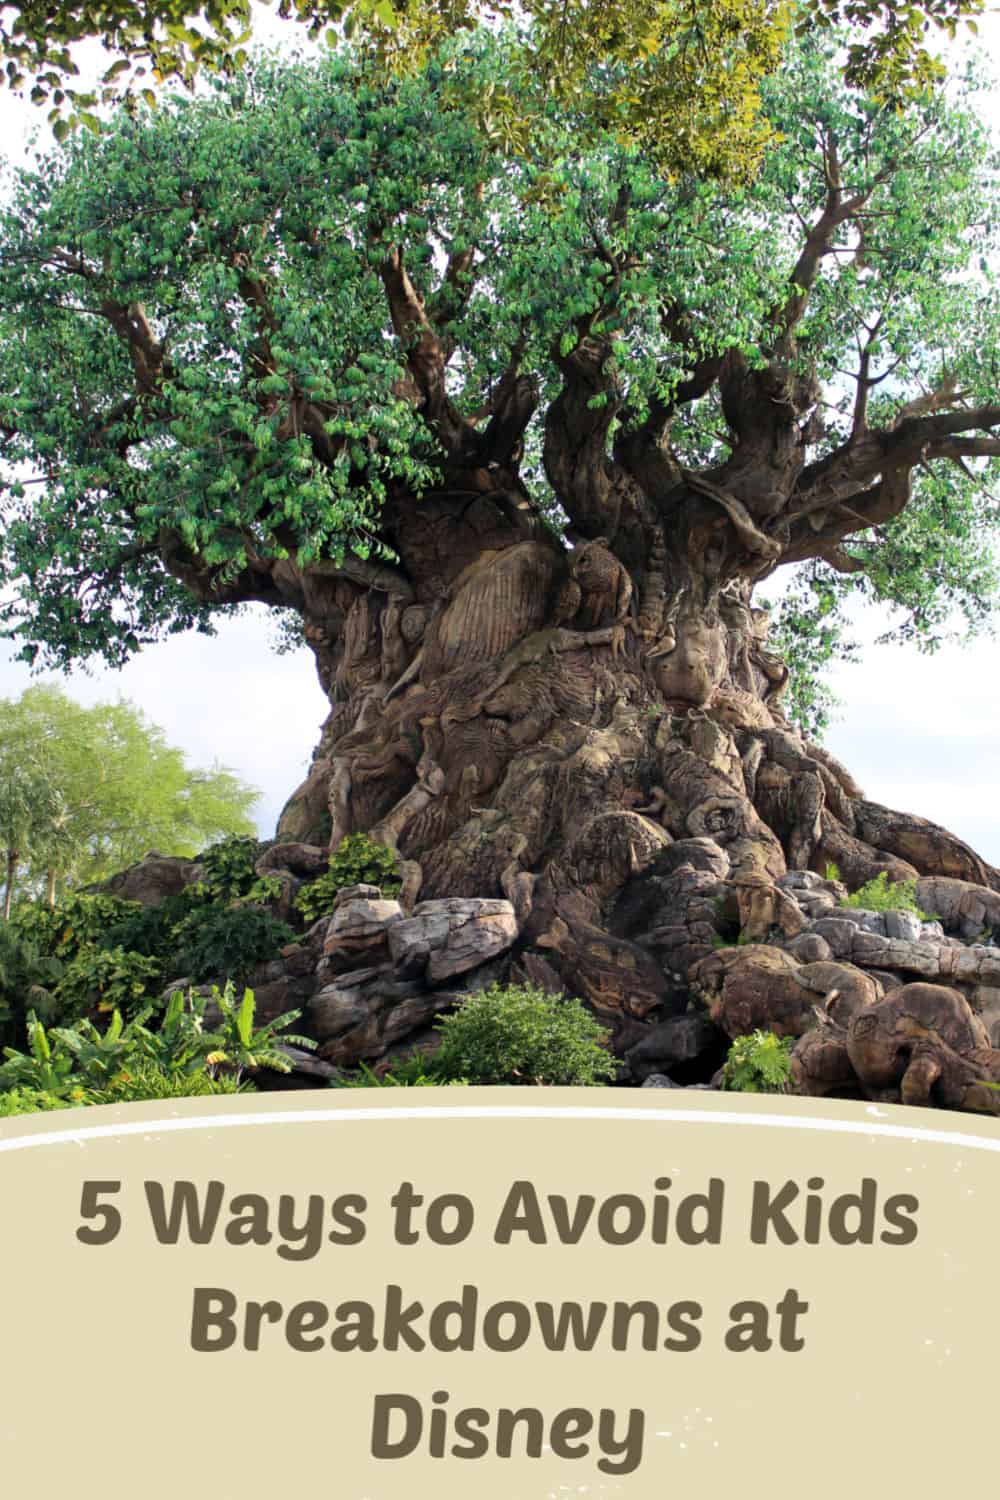 5 Ways to Avoid Kids Breakdowns at Disney - Taking young kids to Disney doesn't have to end with a breakdown. Avoid meltdowns with these simple tips.